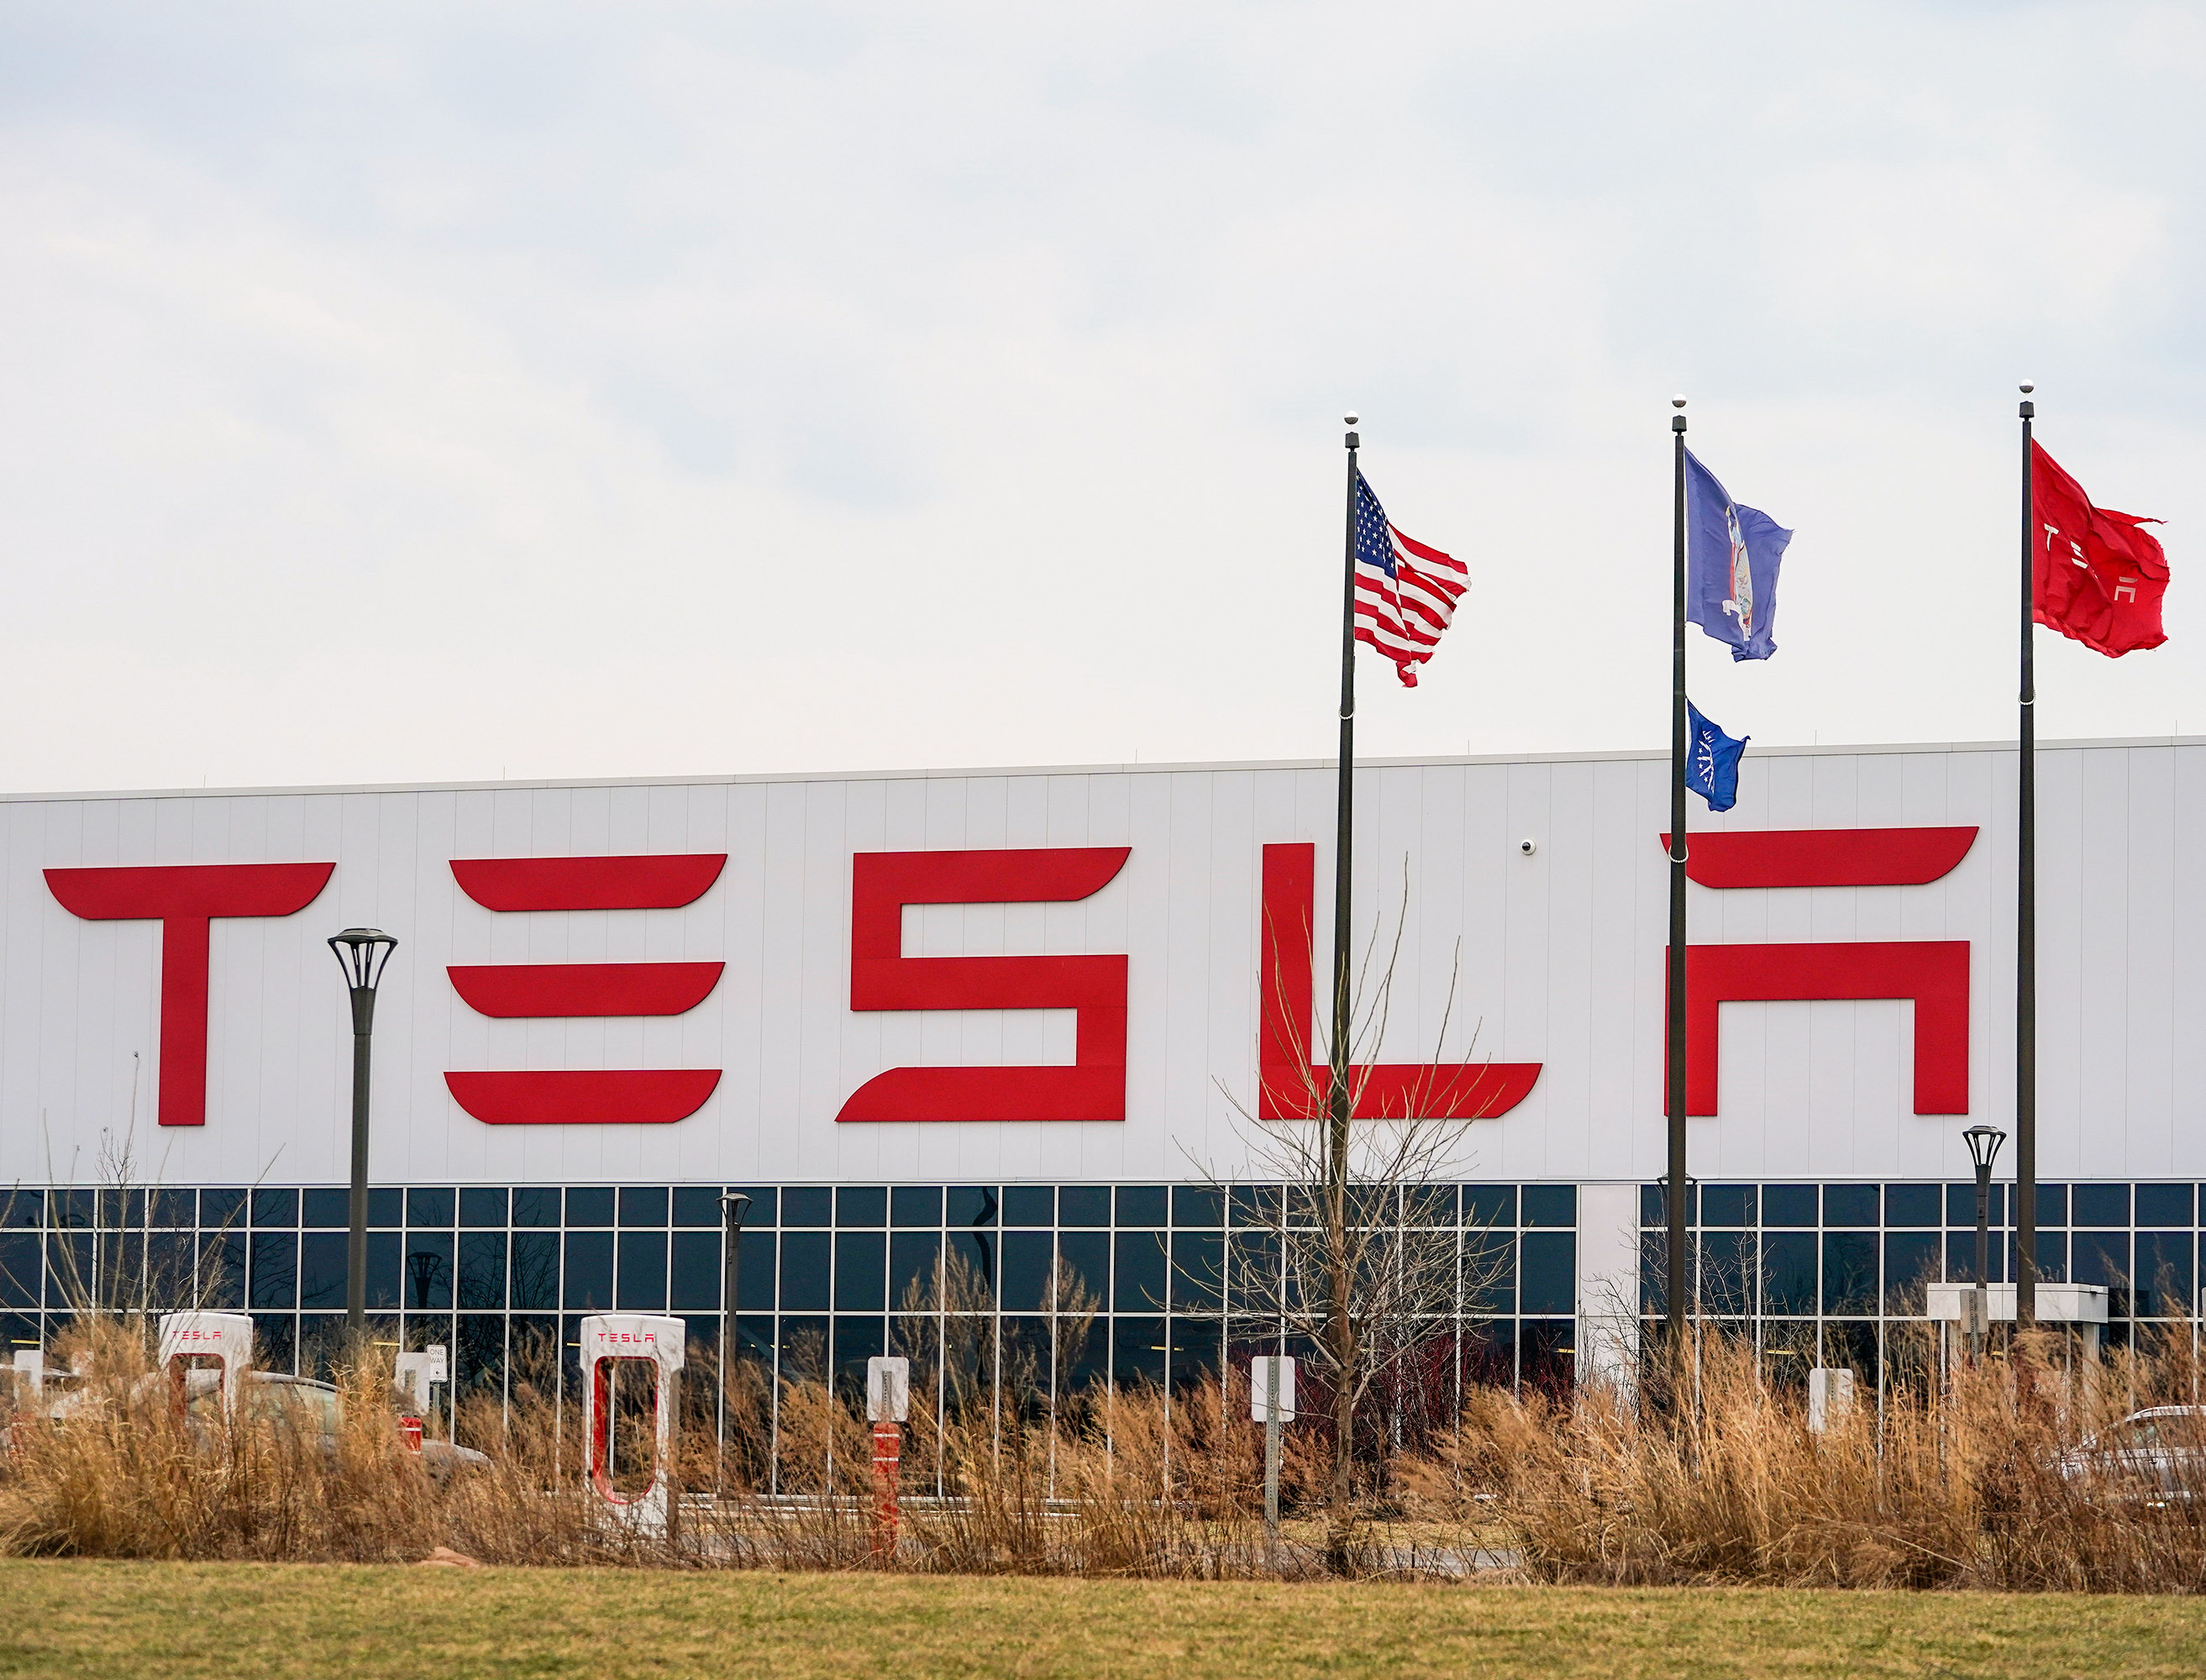 The facade of the Tesla Gigafactory in Buffalo New York, with the Tesla logo in massive letters on the outside.